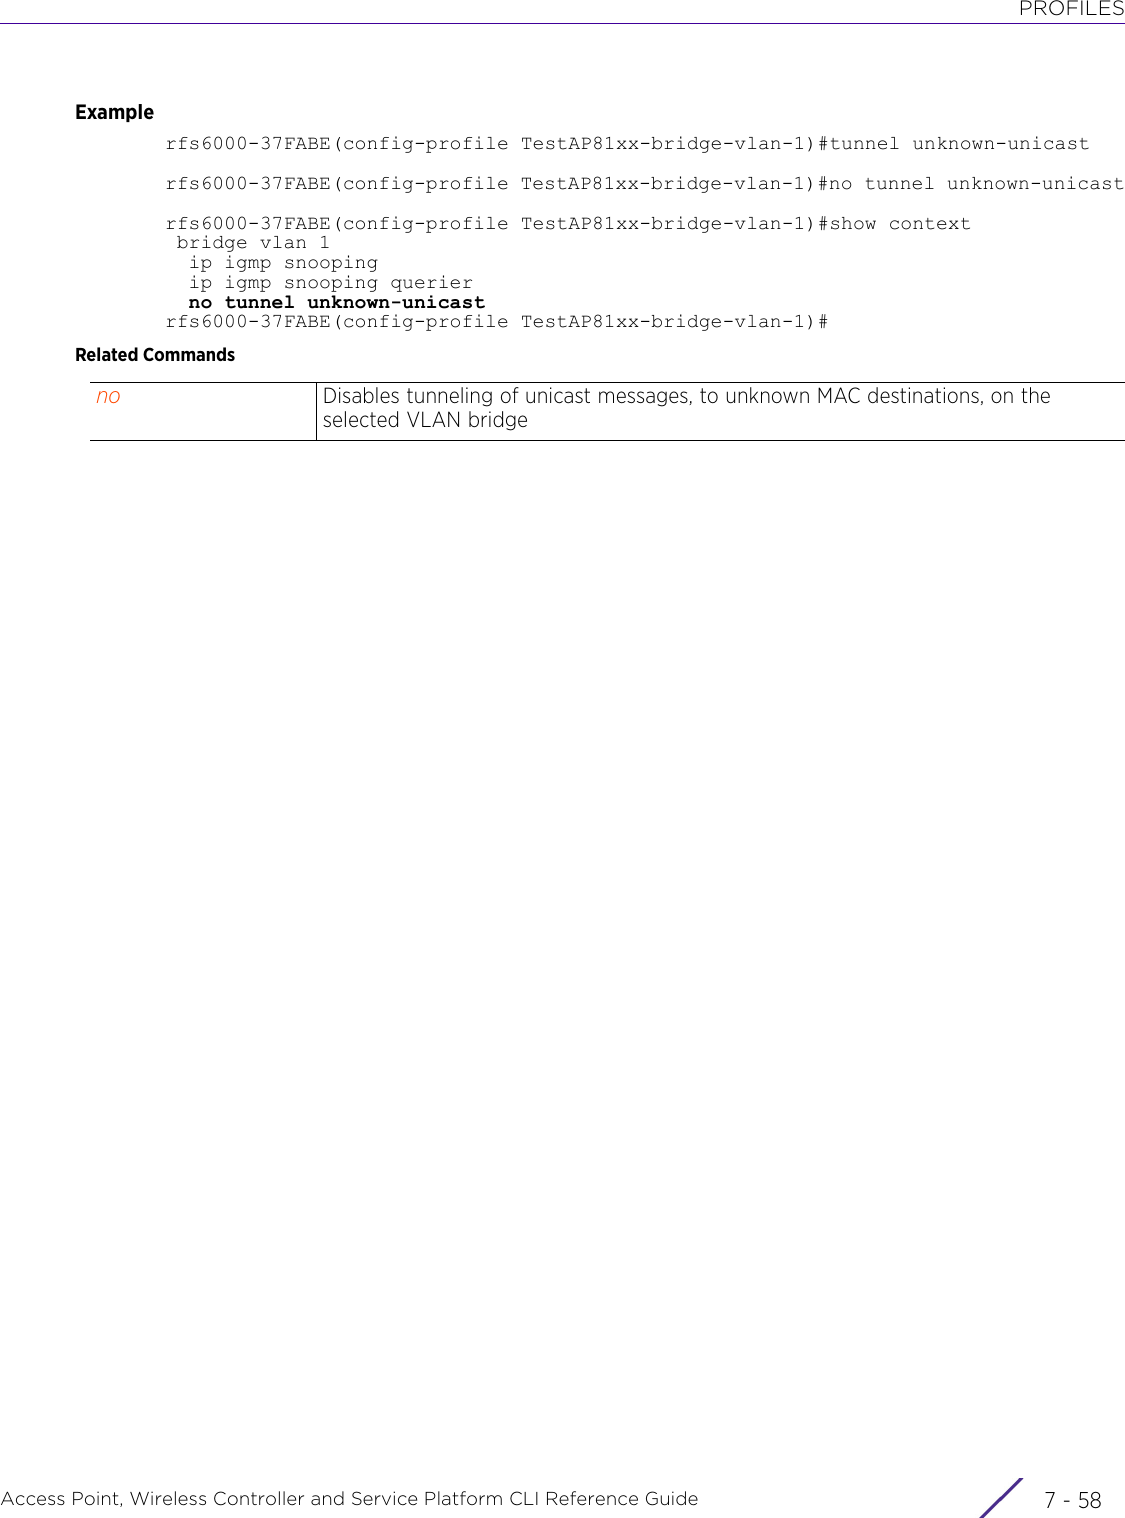 PROFILESAccess Point, Wireless Controller and Service Platform CLI Reference Guide  7 - 58Examplerfs6000-37FABE(config-profile TestAP81xx-bridge-vlan-1)#tunnel unknown-unicastrfs6000-37FABE(config-profile TestAP81xx-bridge-vlan-1)#no tunnel unknown-unicastrfs6000-37FABE(config-profile TestAP81xx-bridge-vlan-1)#show context bridge vlan 1  ip igmp snooping  ip igmp snooping querier  no tunnel unknown-unicastrfs6000-37FABE(config-profile TestAP81xx-bridge-vlan-1)#Related Commandsno Disables tunneling of unicast messages, to unknown MAC destinations, on the selected VLAN bridge